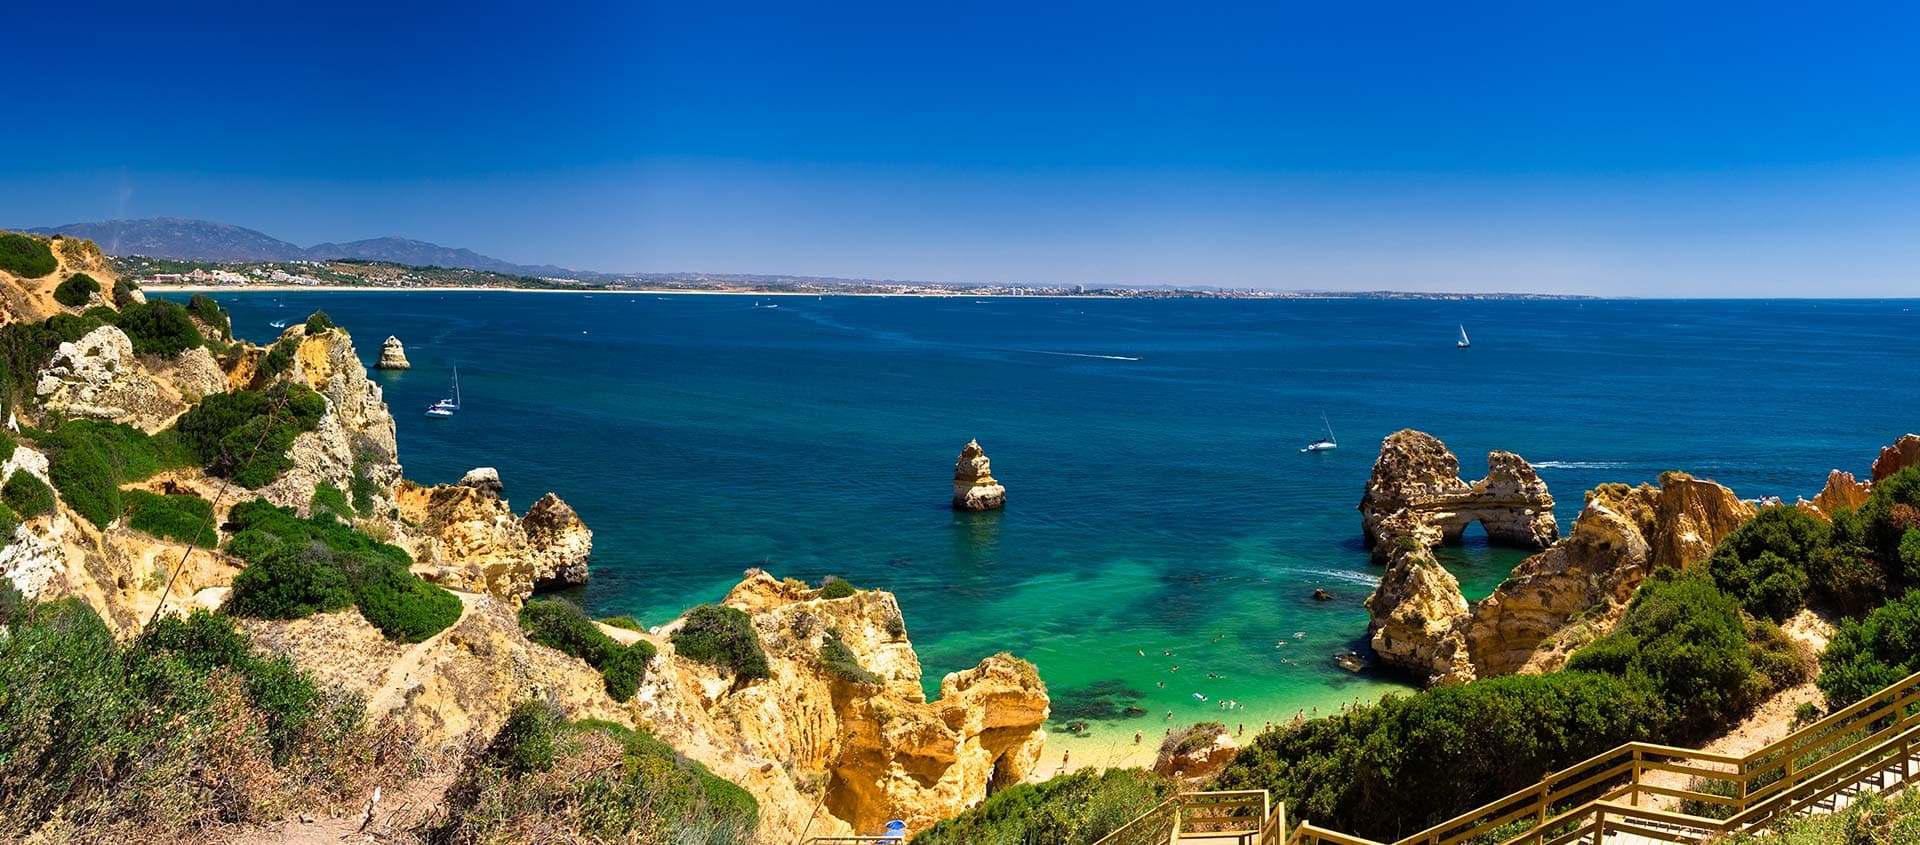 Moving to the Algarve in Portugal